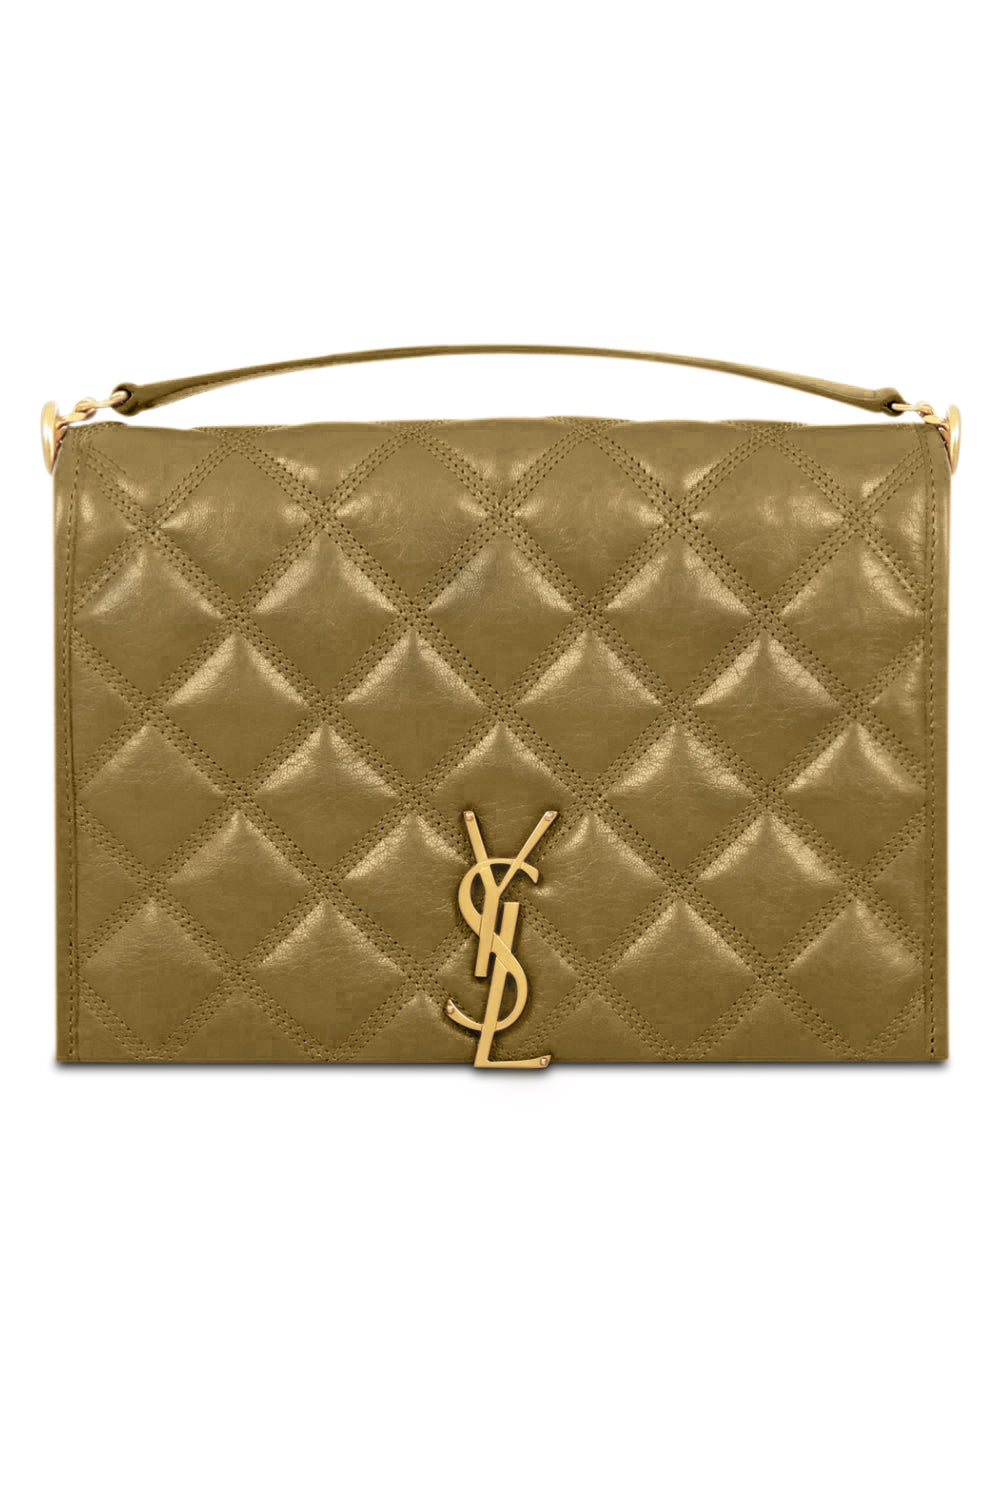 SAINT LAURENT BAGS GREEN BECKY CHAIN BAG OLIVE/GOLD